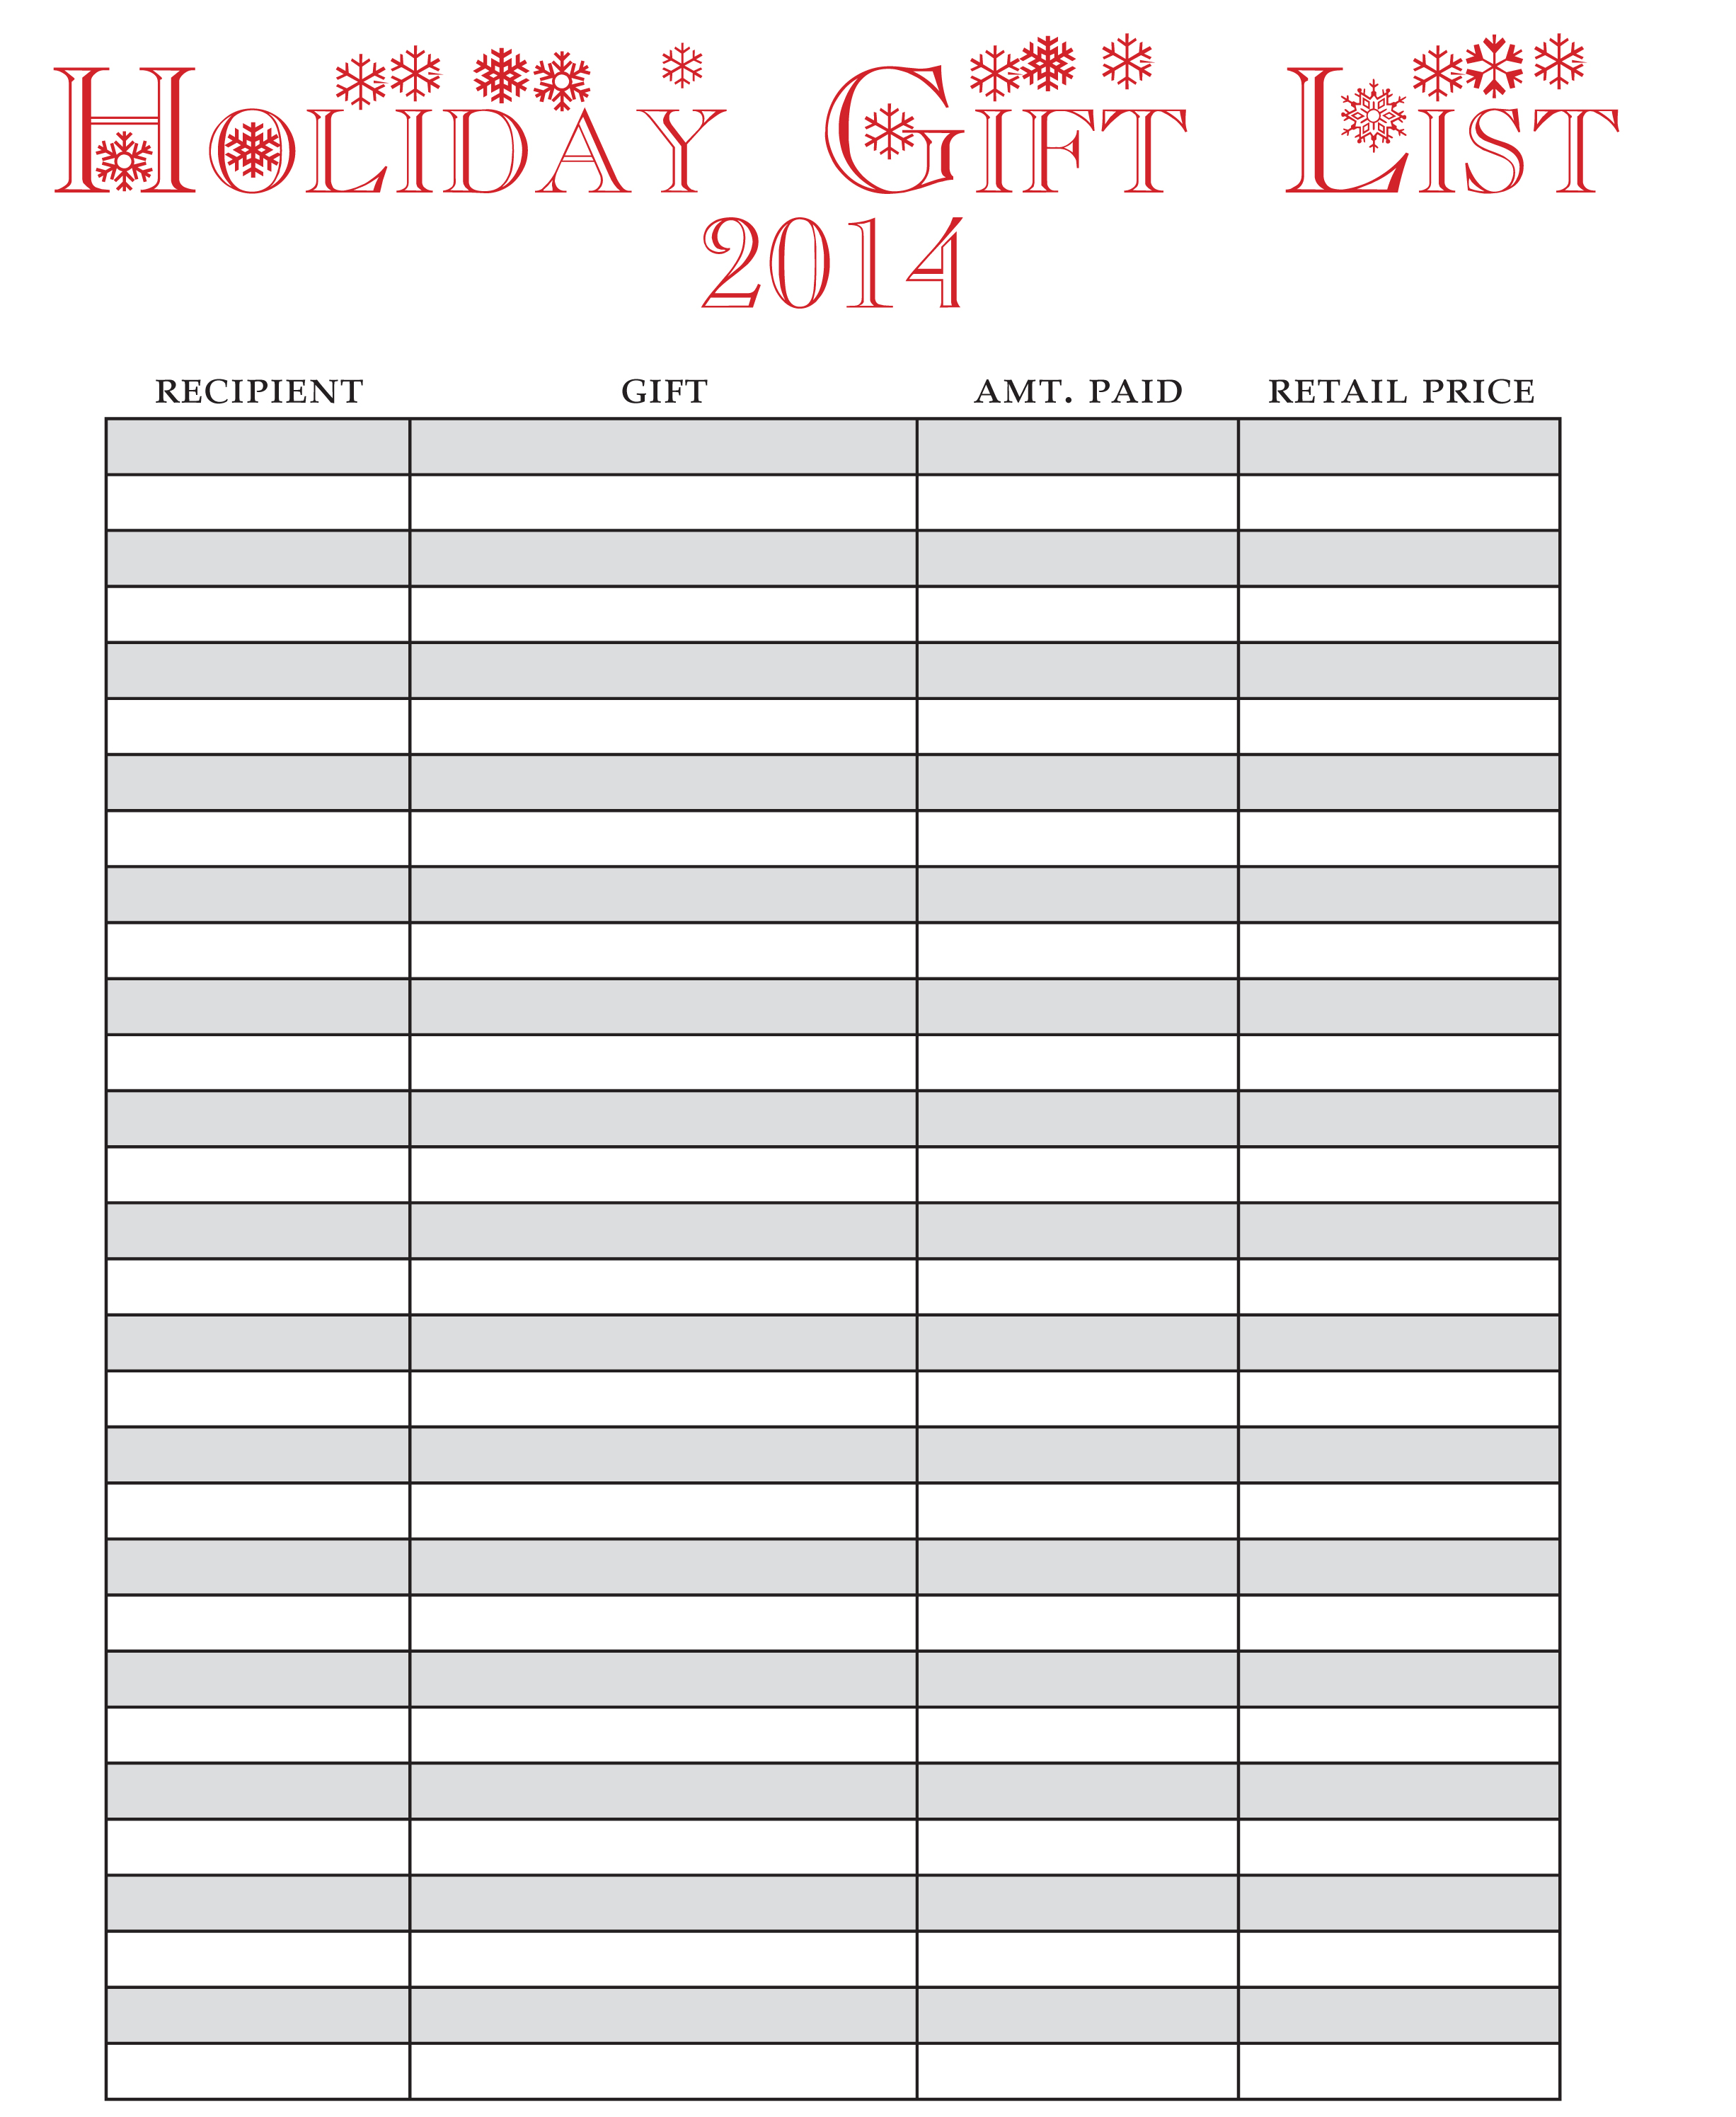 Holiday Gift List FREE Printable! » One Beautiful Home